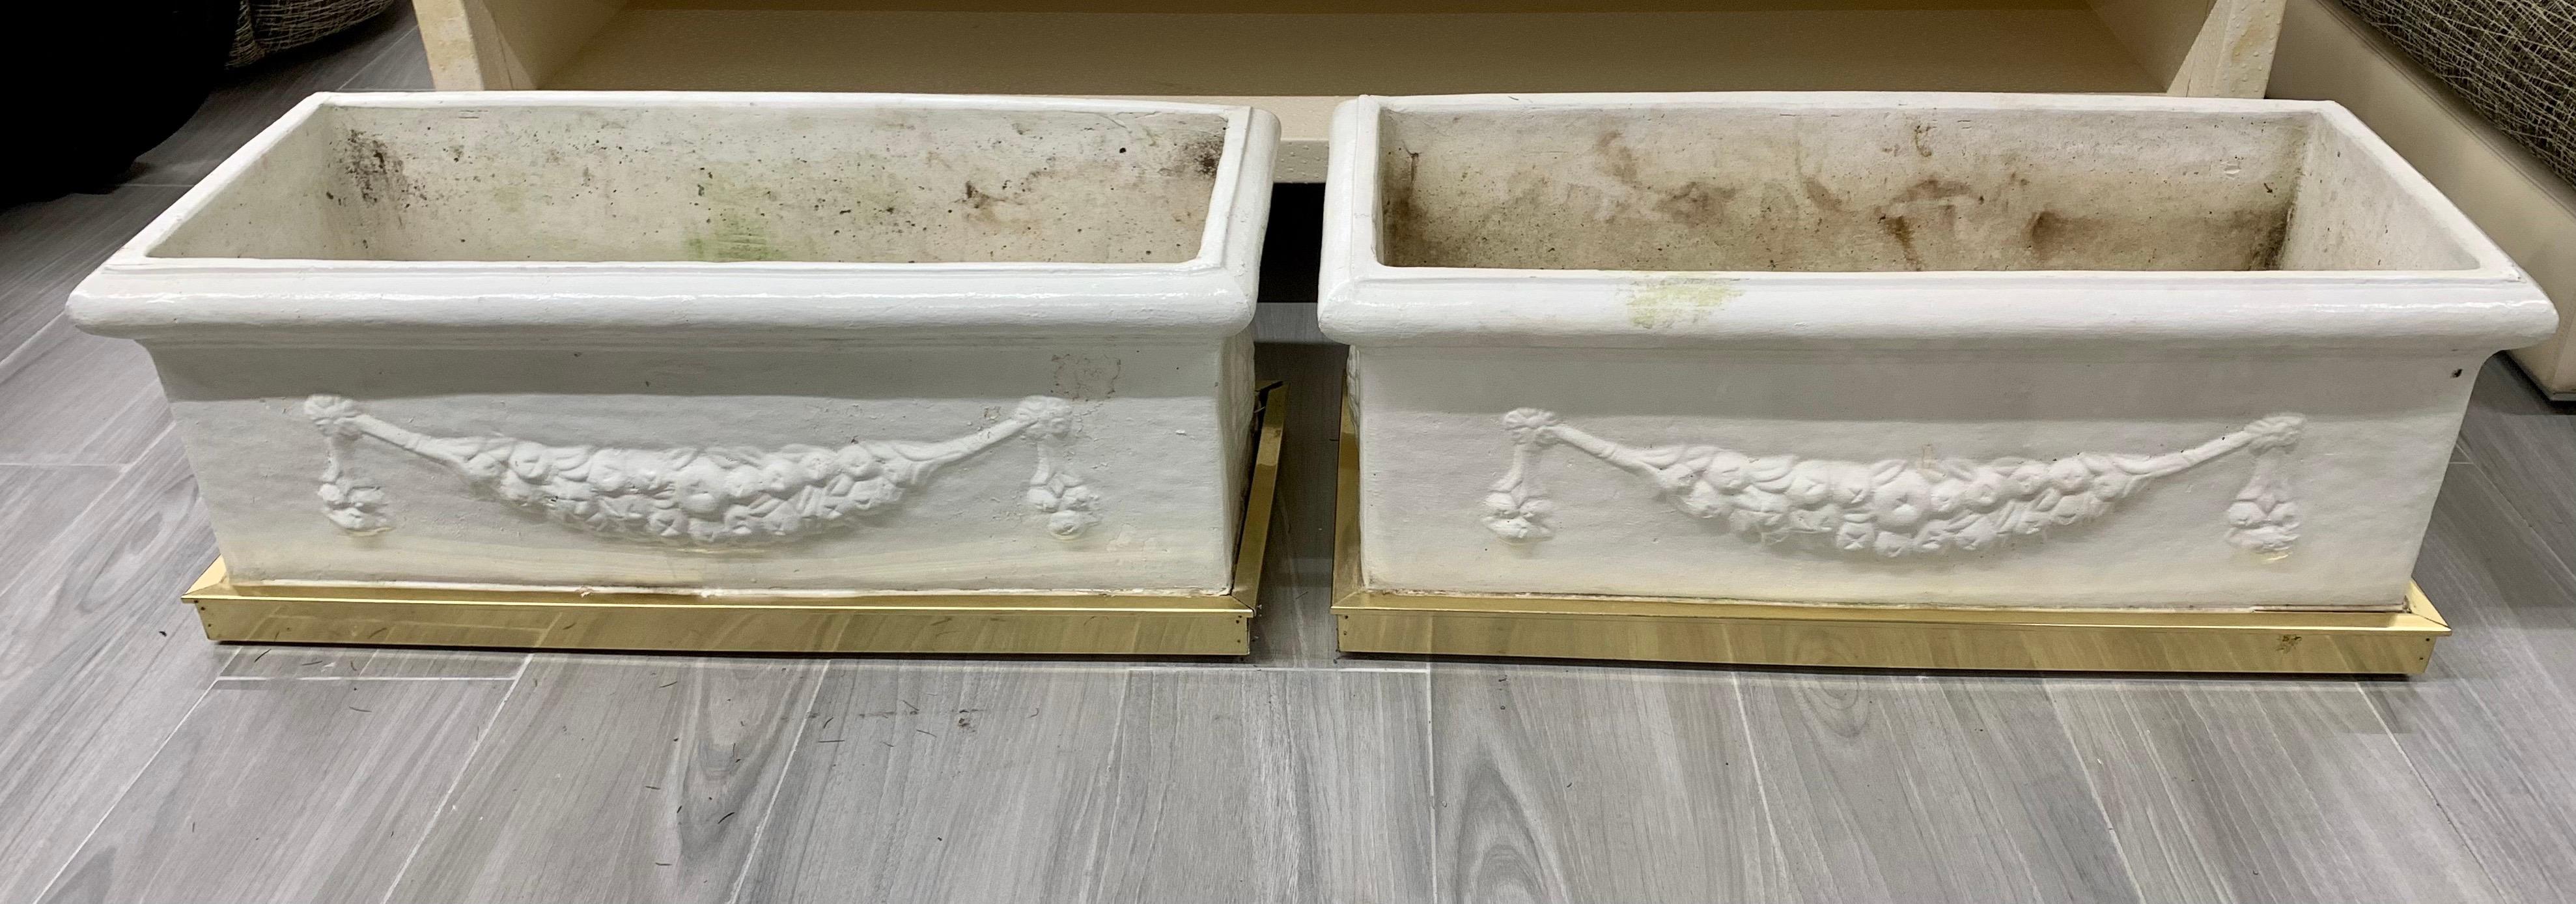 Rare to see a matching pair of large, heavy plaster planters that have a brass like gold chrome bases! Rare indeed and lines to die for. Now, more than ever, home is where the heart is.